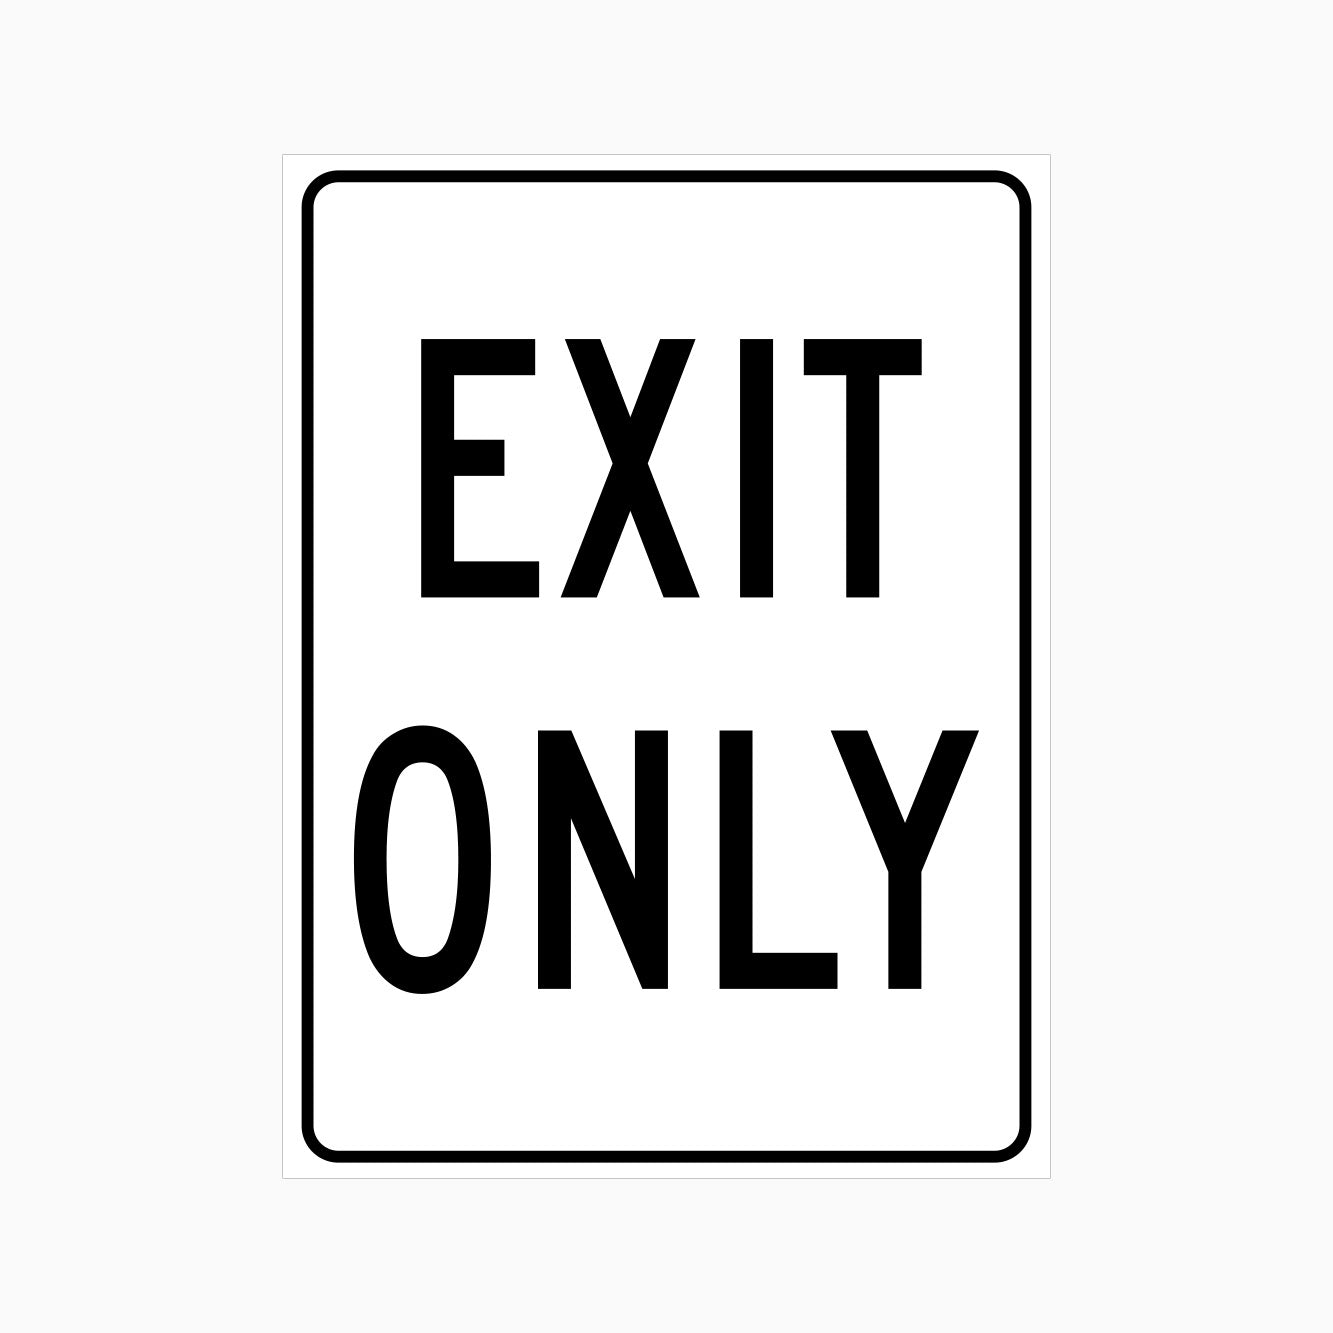 EXIT ONLY SIGN - GET SIGNS